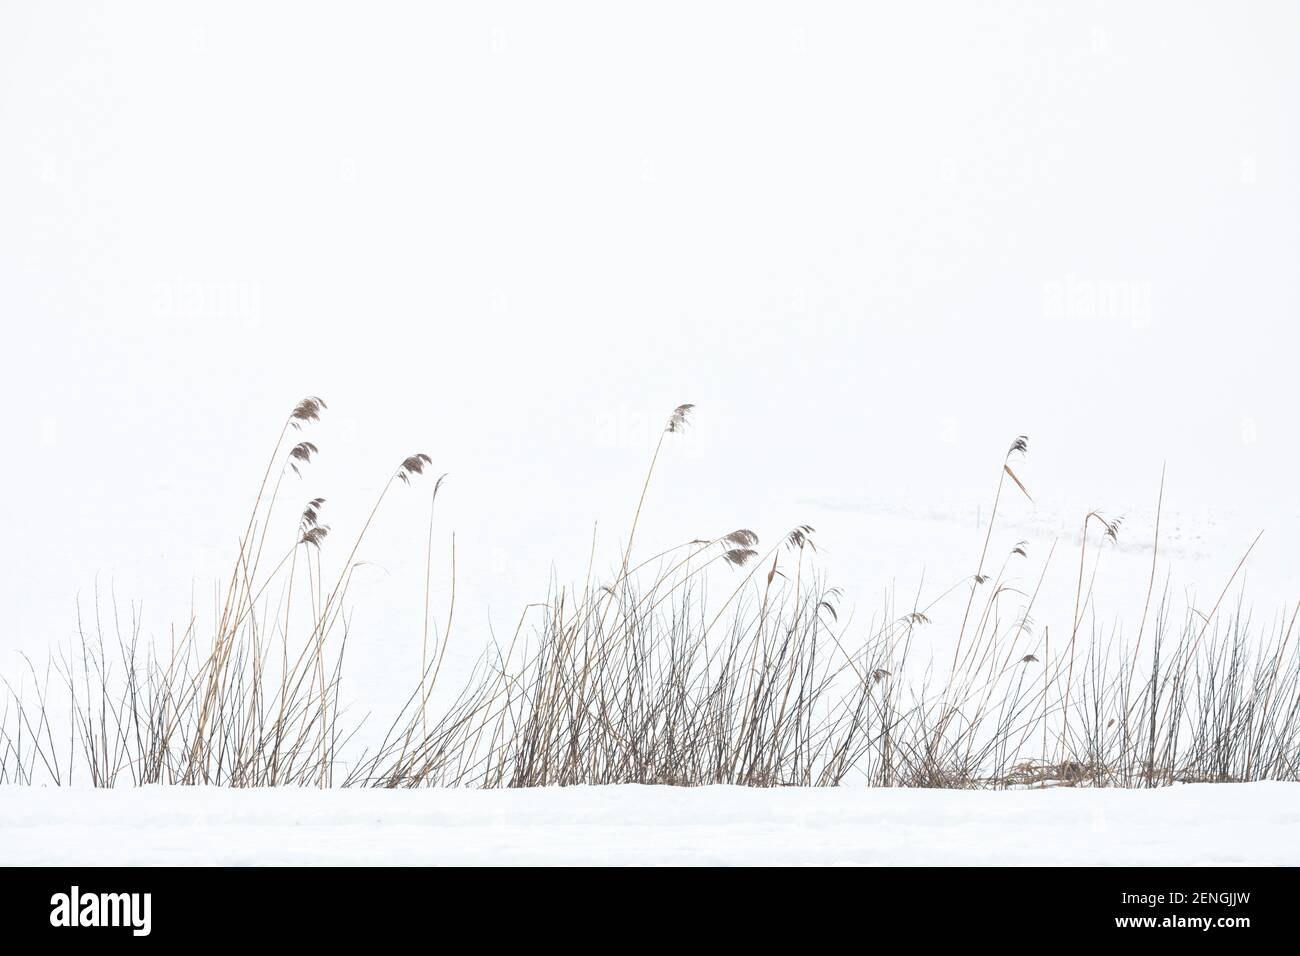 Winter landscape. Reed at the edge of a snow-covered field in morning mist. Stock Photo